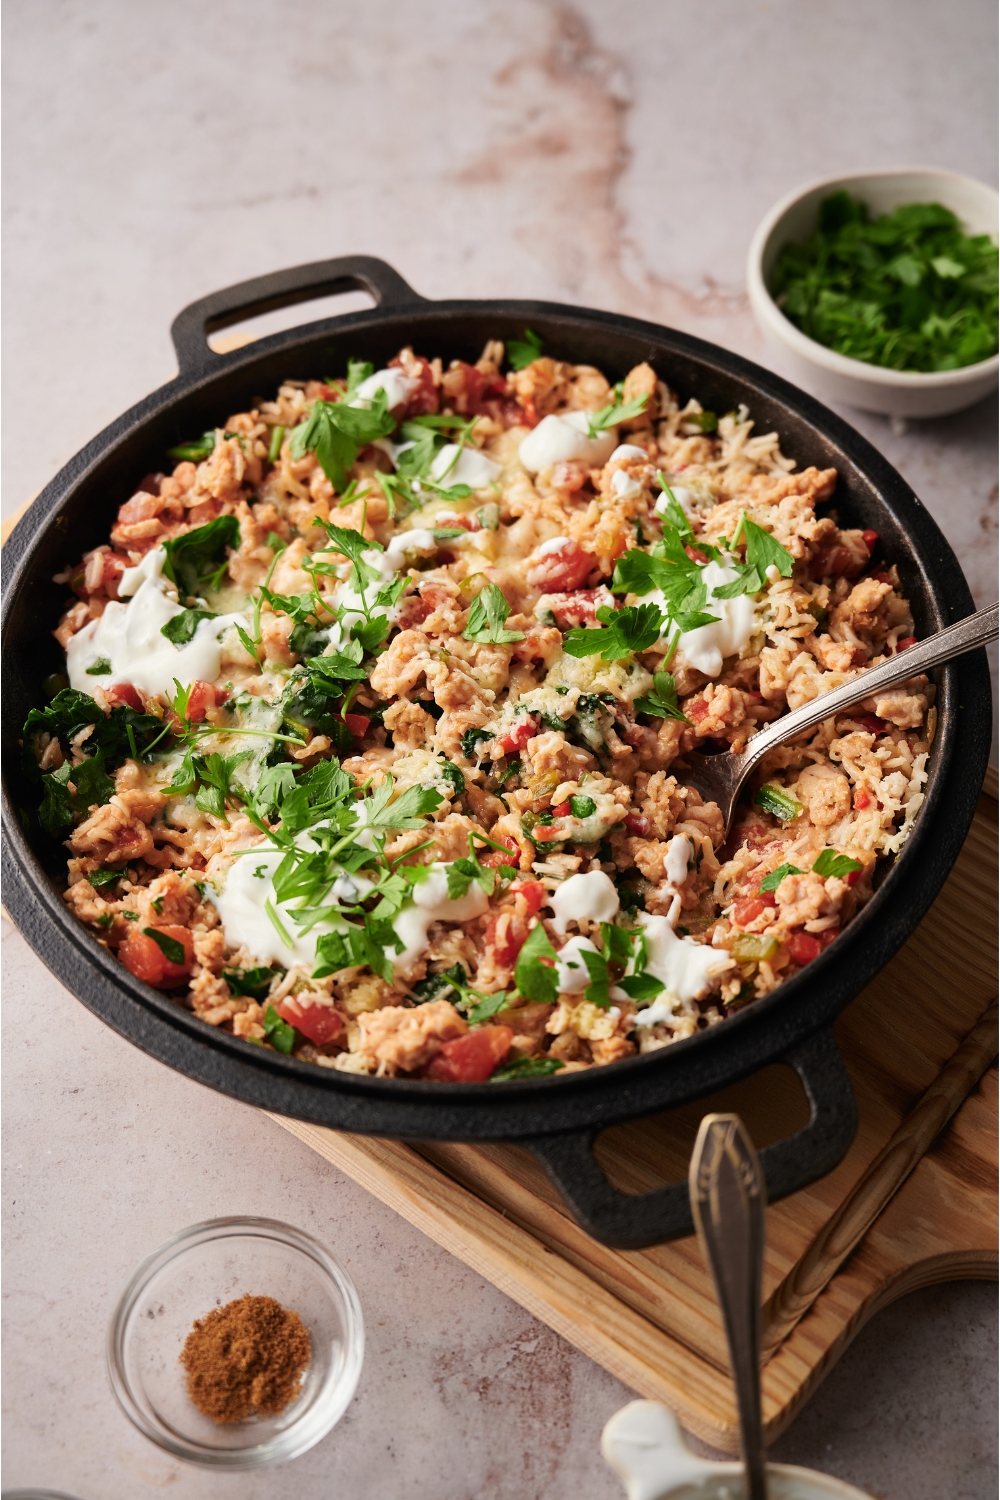 Black skillet on a wood board, filled with stuffed pepper casserole. There is a spoon in the pot and the casserole is topped with sour cream and fresh herbs.